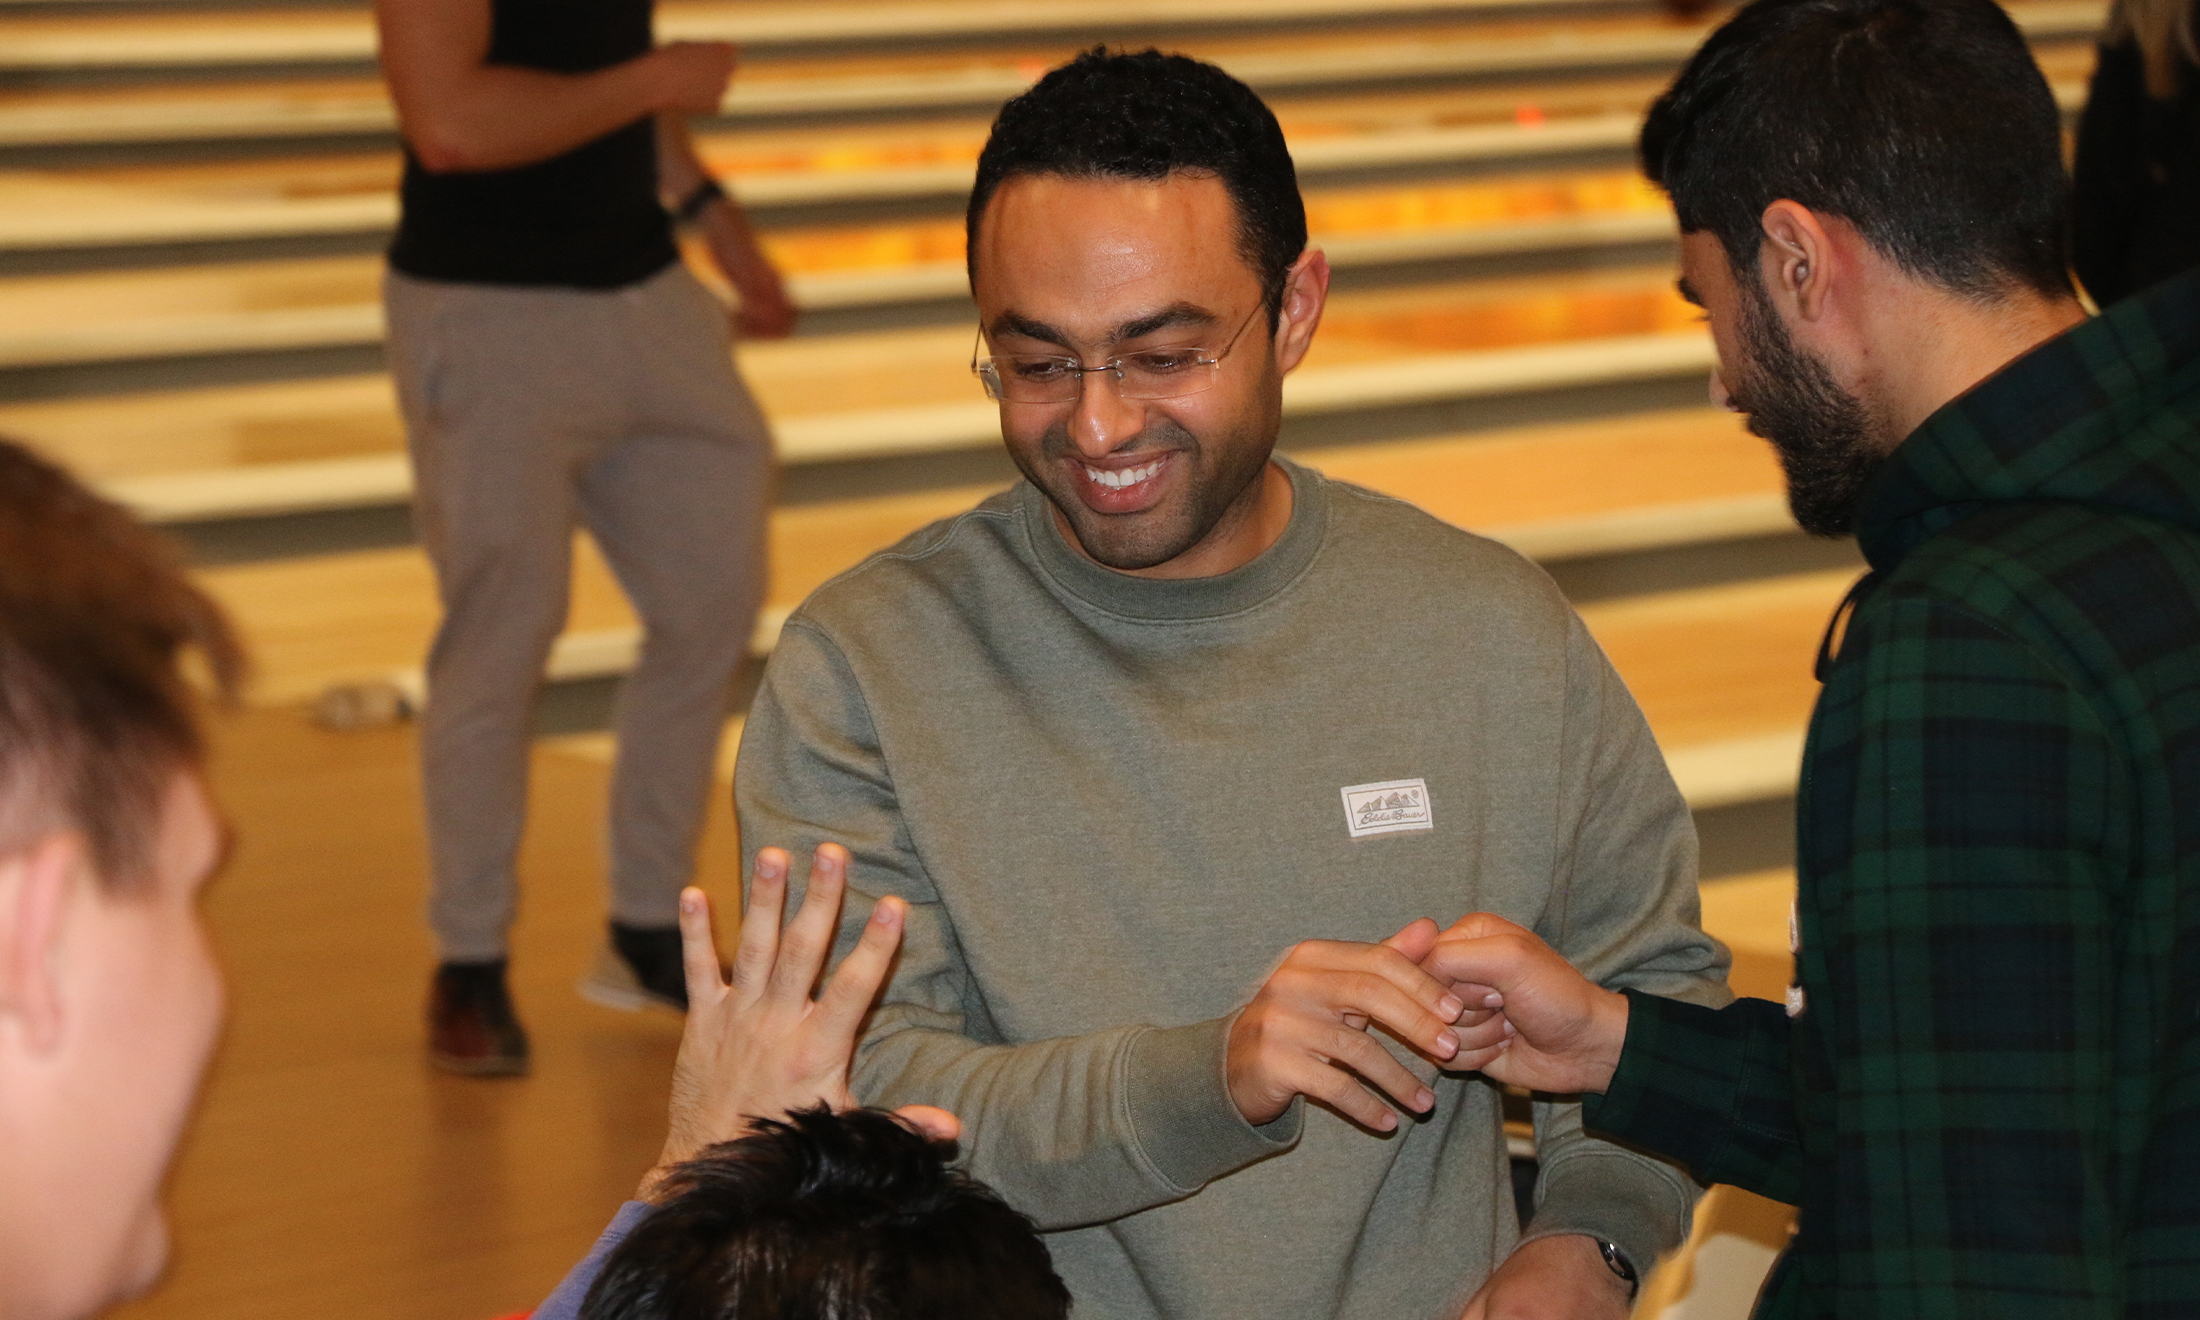 An image of OUWB students bowling and celebrating